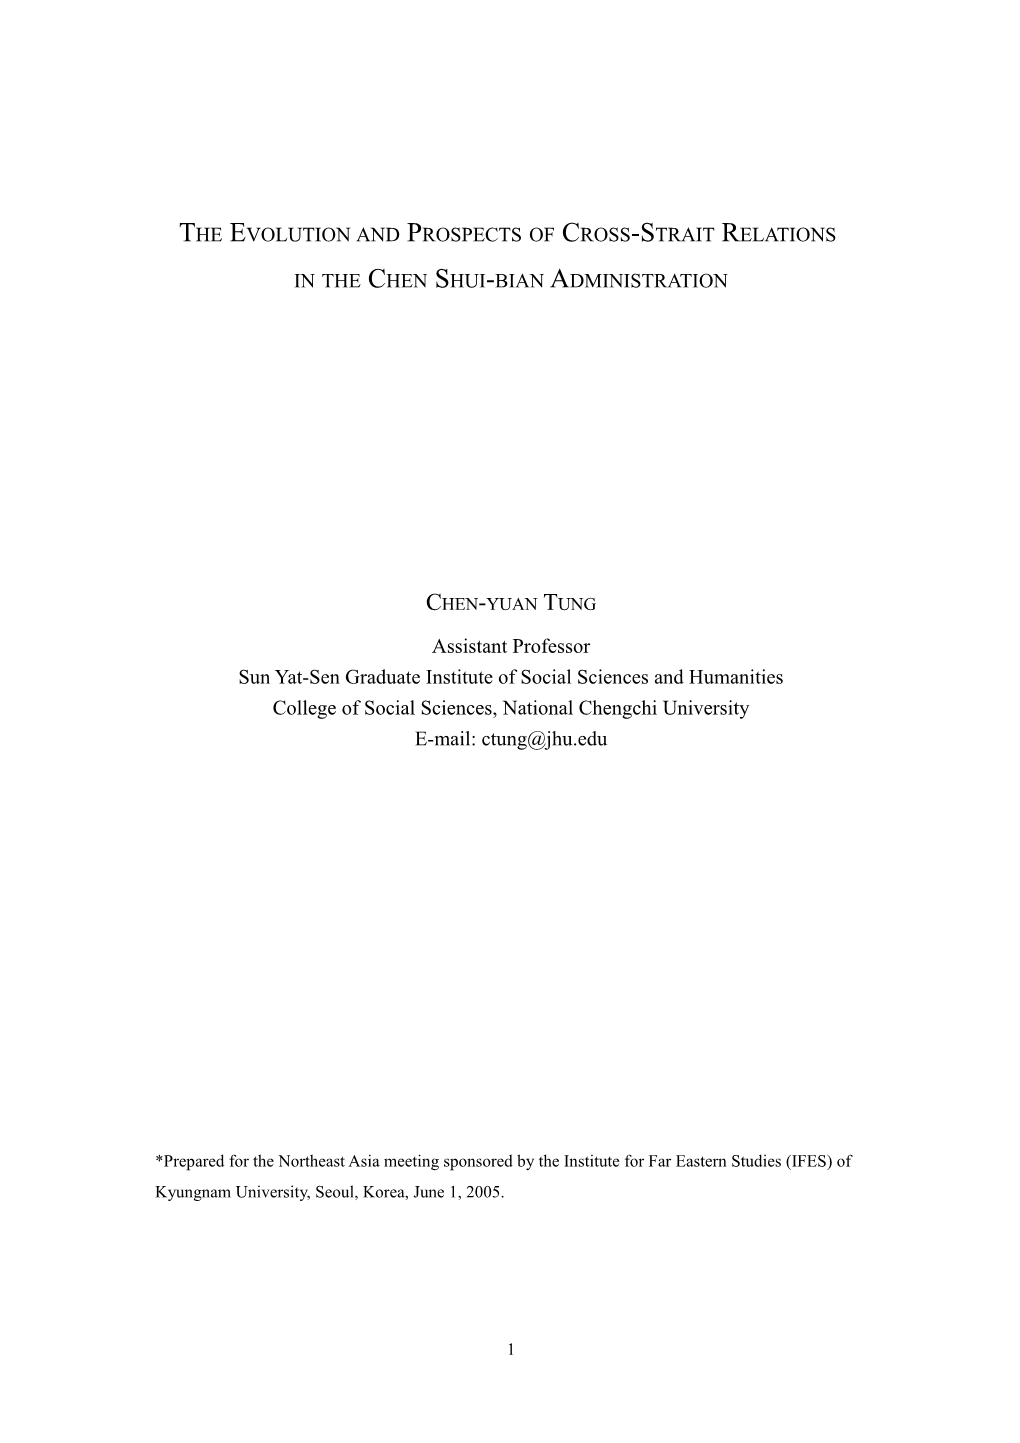 The Evolution and Prospects of Cross-Strait Relations in the Chen Shui-Bian Administration